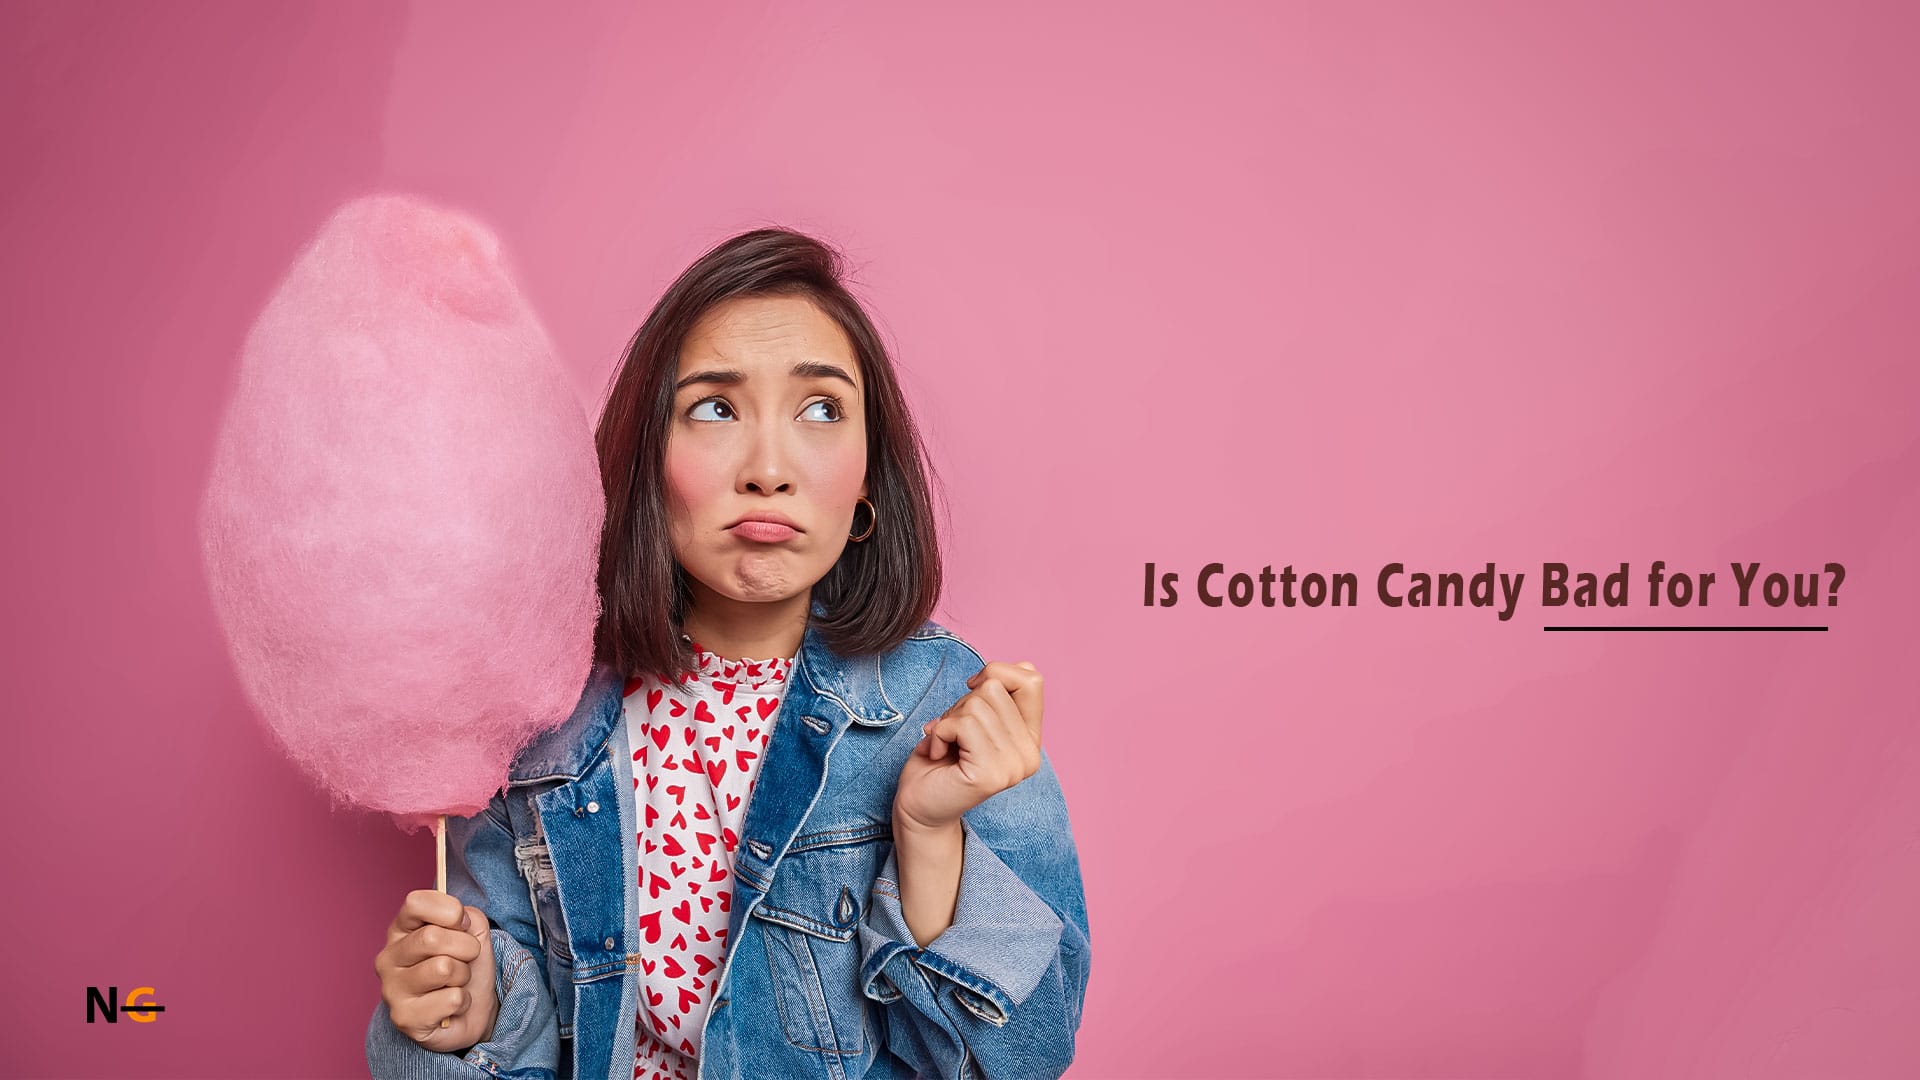 Cotton Candy Health Effects